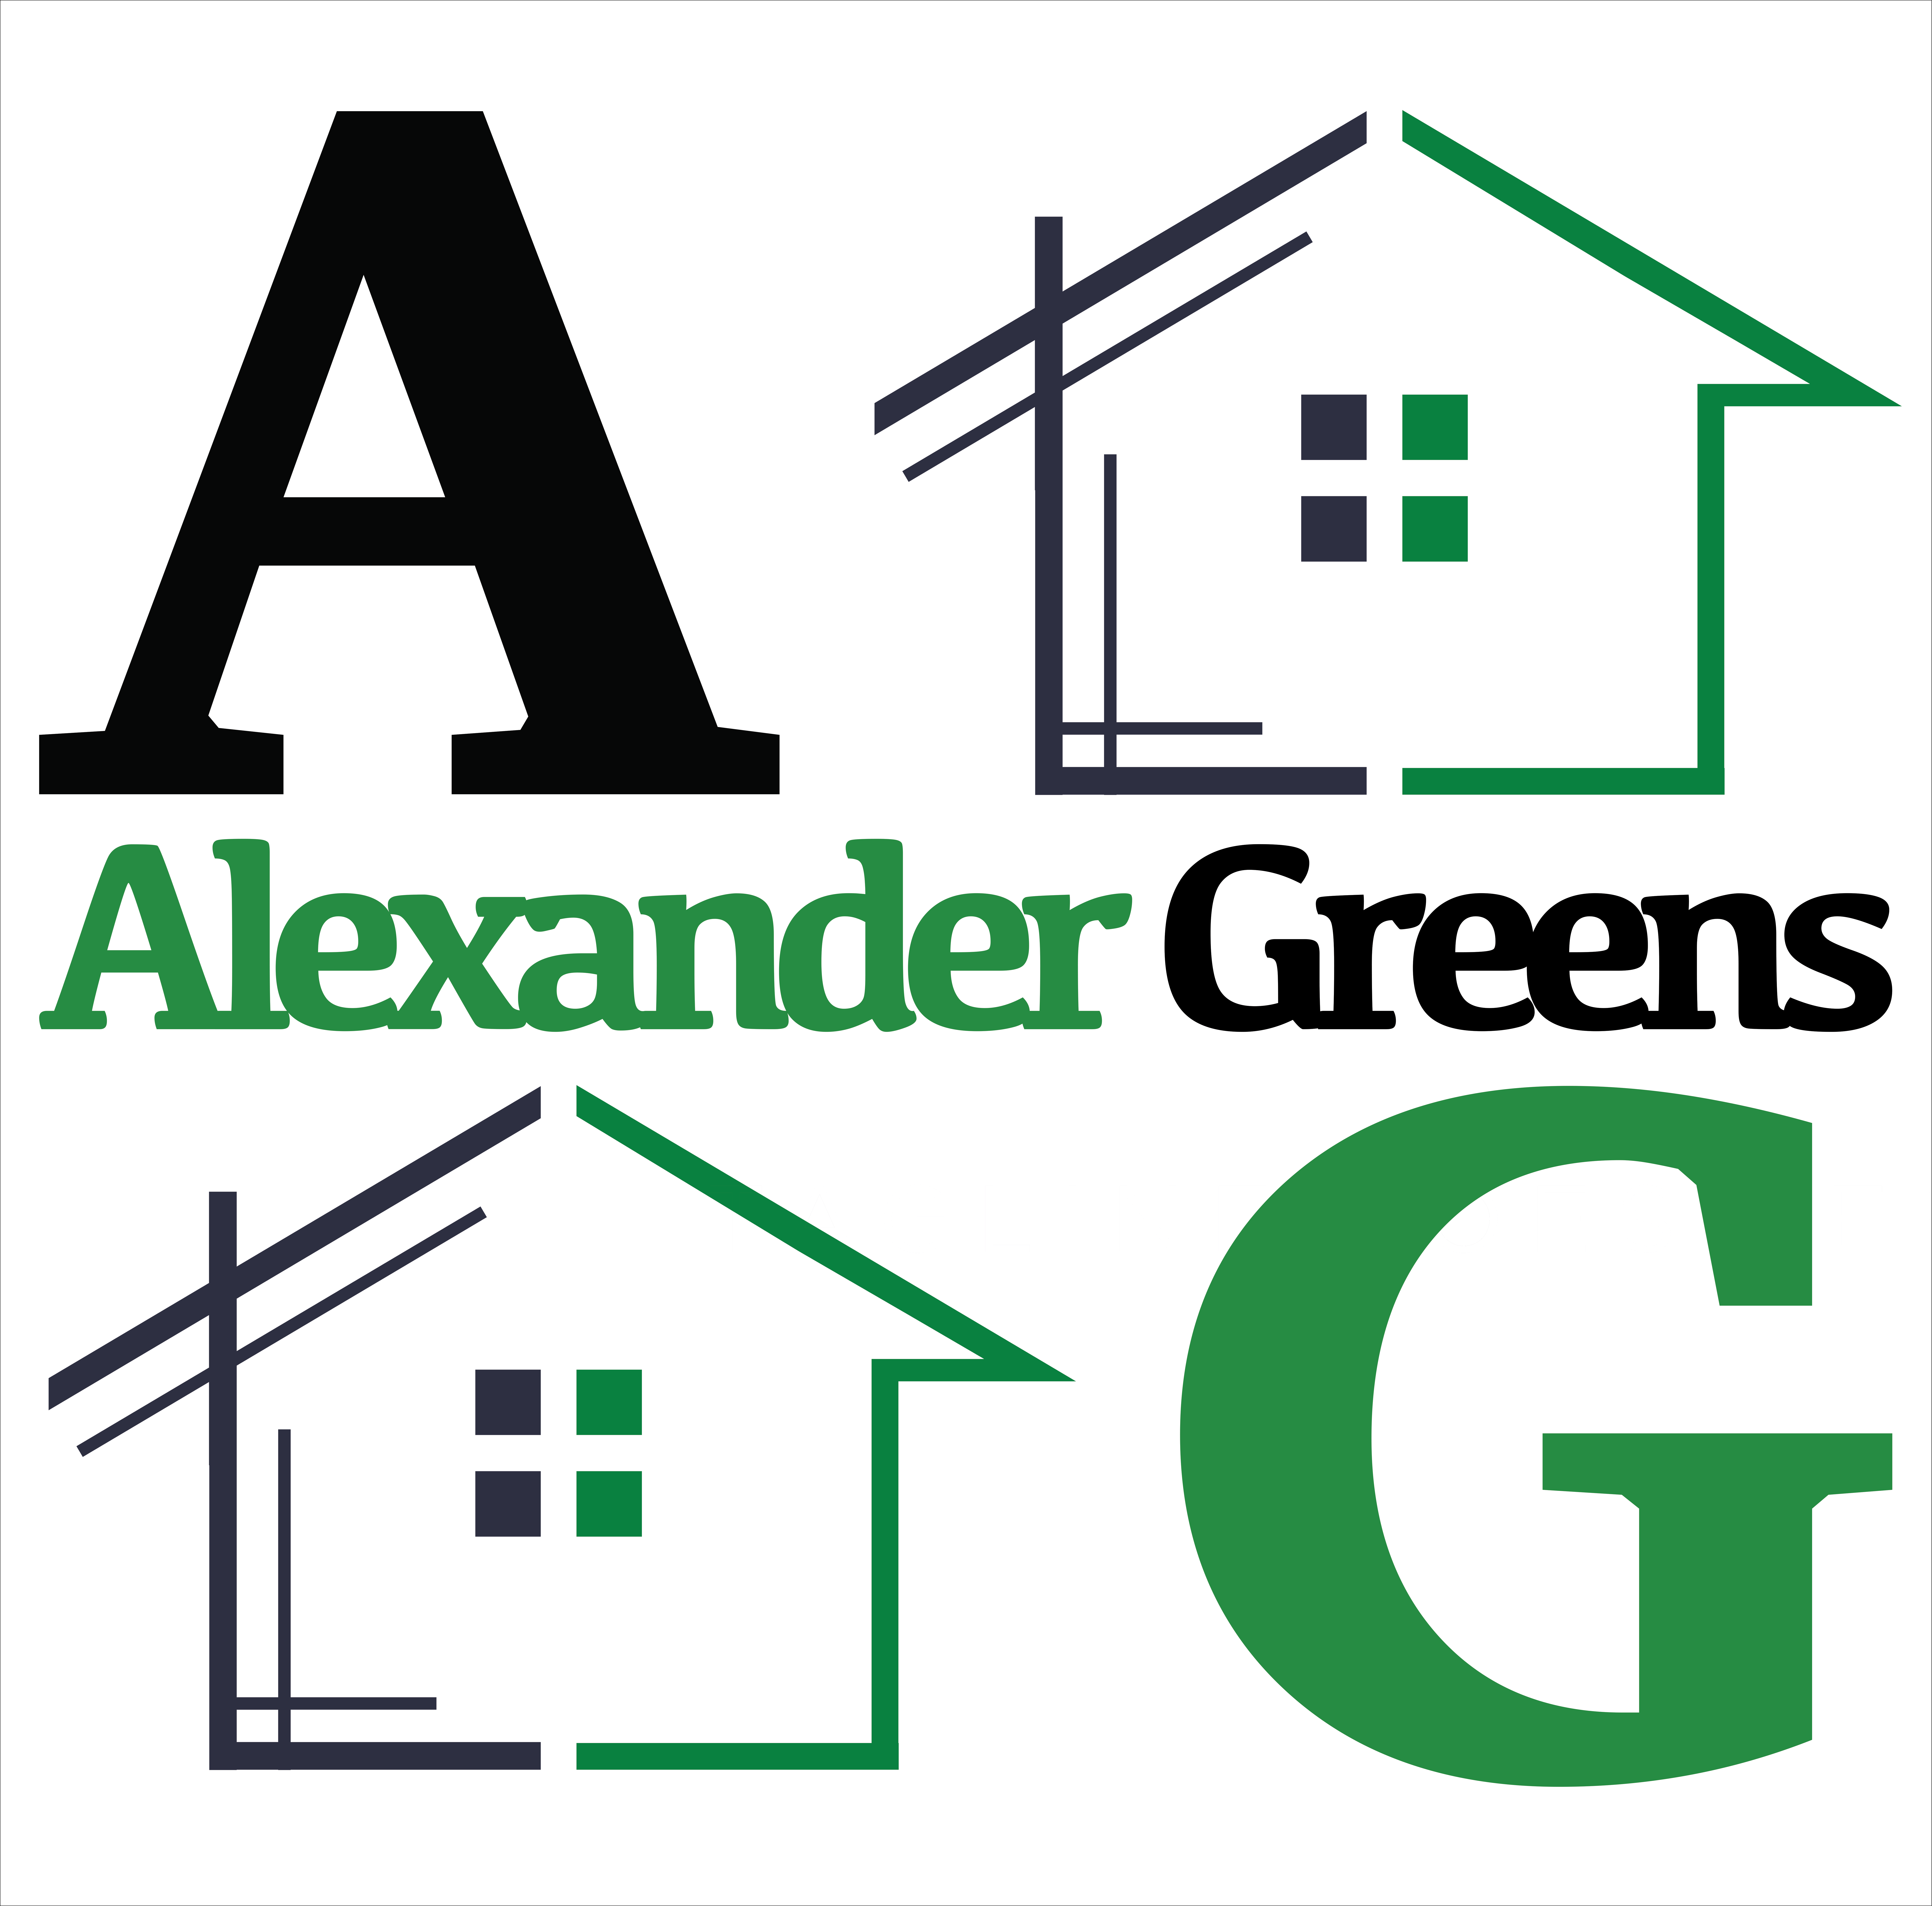 Alexander Greens Property Services : Letting agents in Soham Cambridgeshire